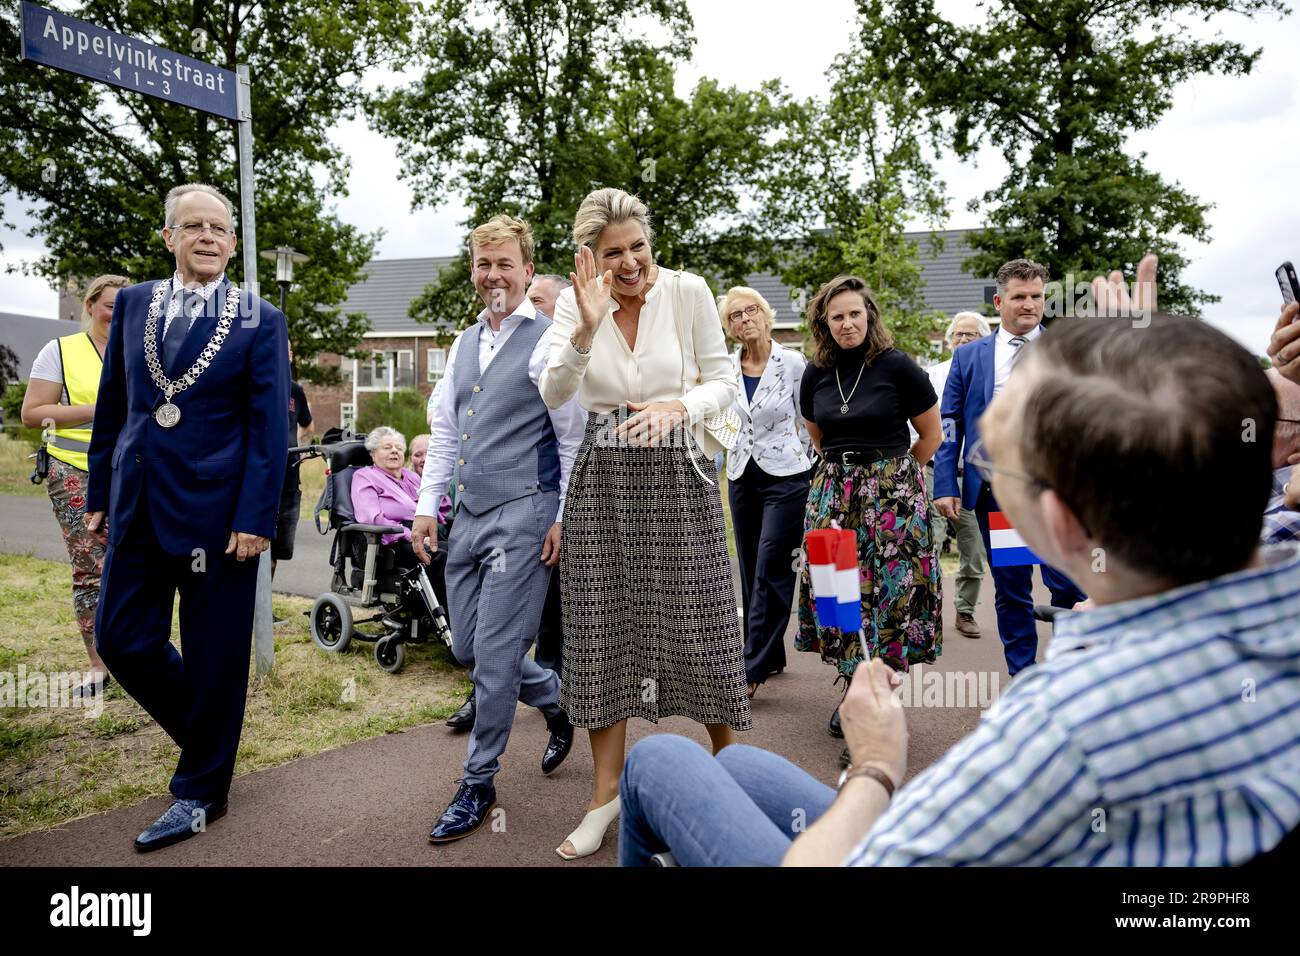 STERKSEL - Queen Maxima during a working visit to the inclusive residential area Kloostervelden. The district is connected to Stichting Kempenhaeghe in Heeze-Leende, a center of expertise for people with complex epilepsy, sleep disorders and neurological learning and developmental disorders. ANP ROBIN VAN LONKHUIJSEN netherlands out - belgium out Stock Photo